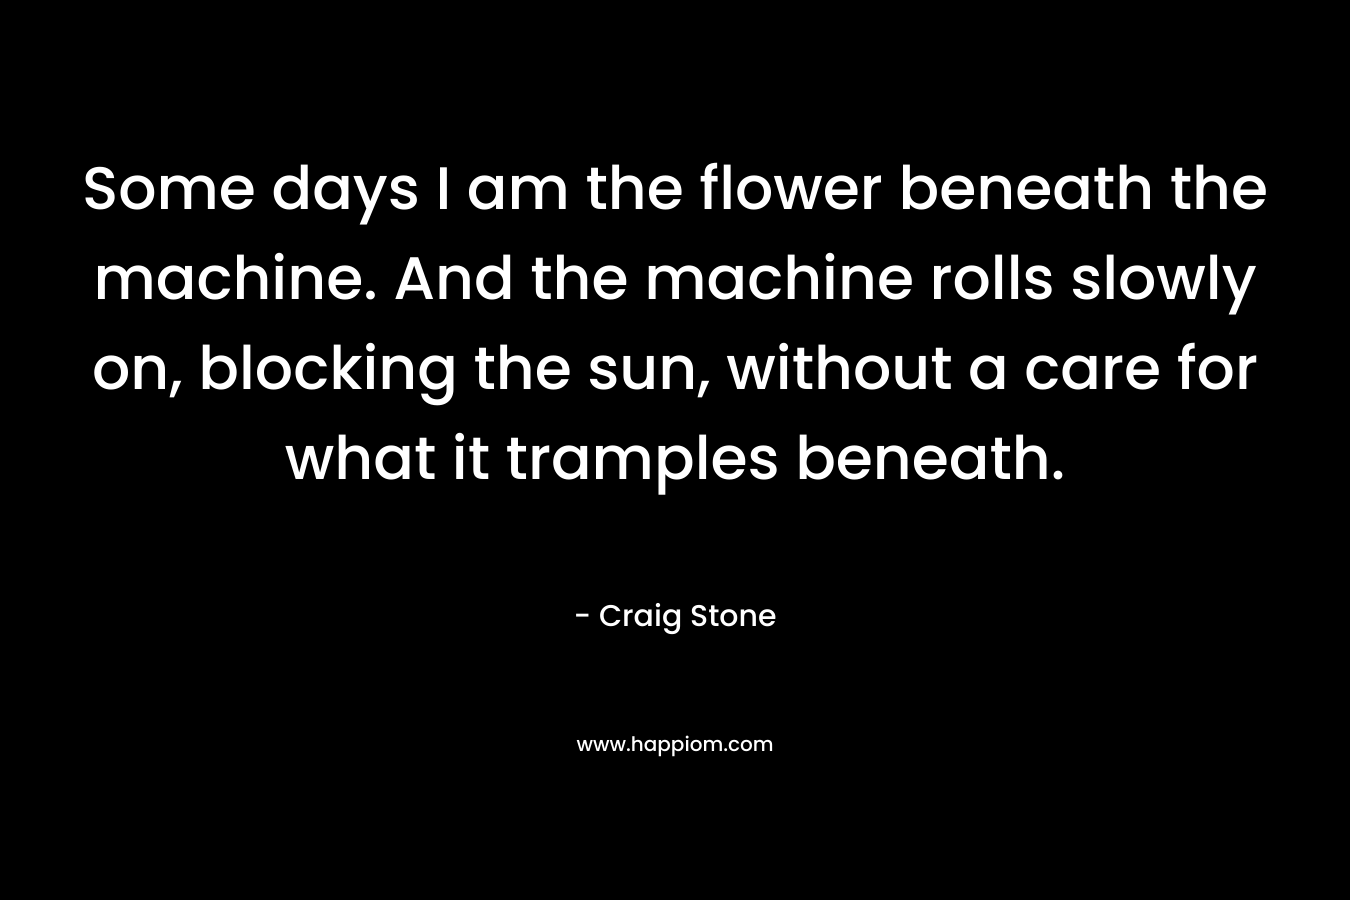 Some days I am the flower beneath the machine. And the machine rolls slowly on, blocking the sun, without a care for what it tramples beneath.